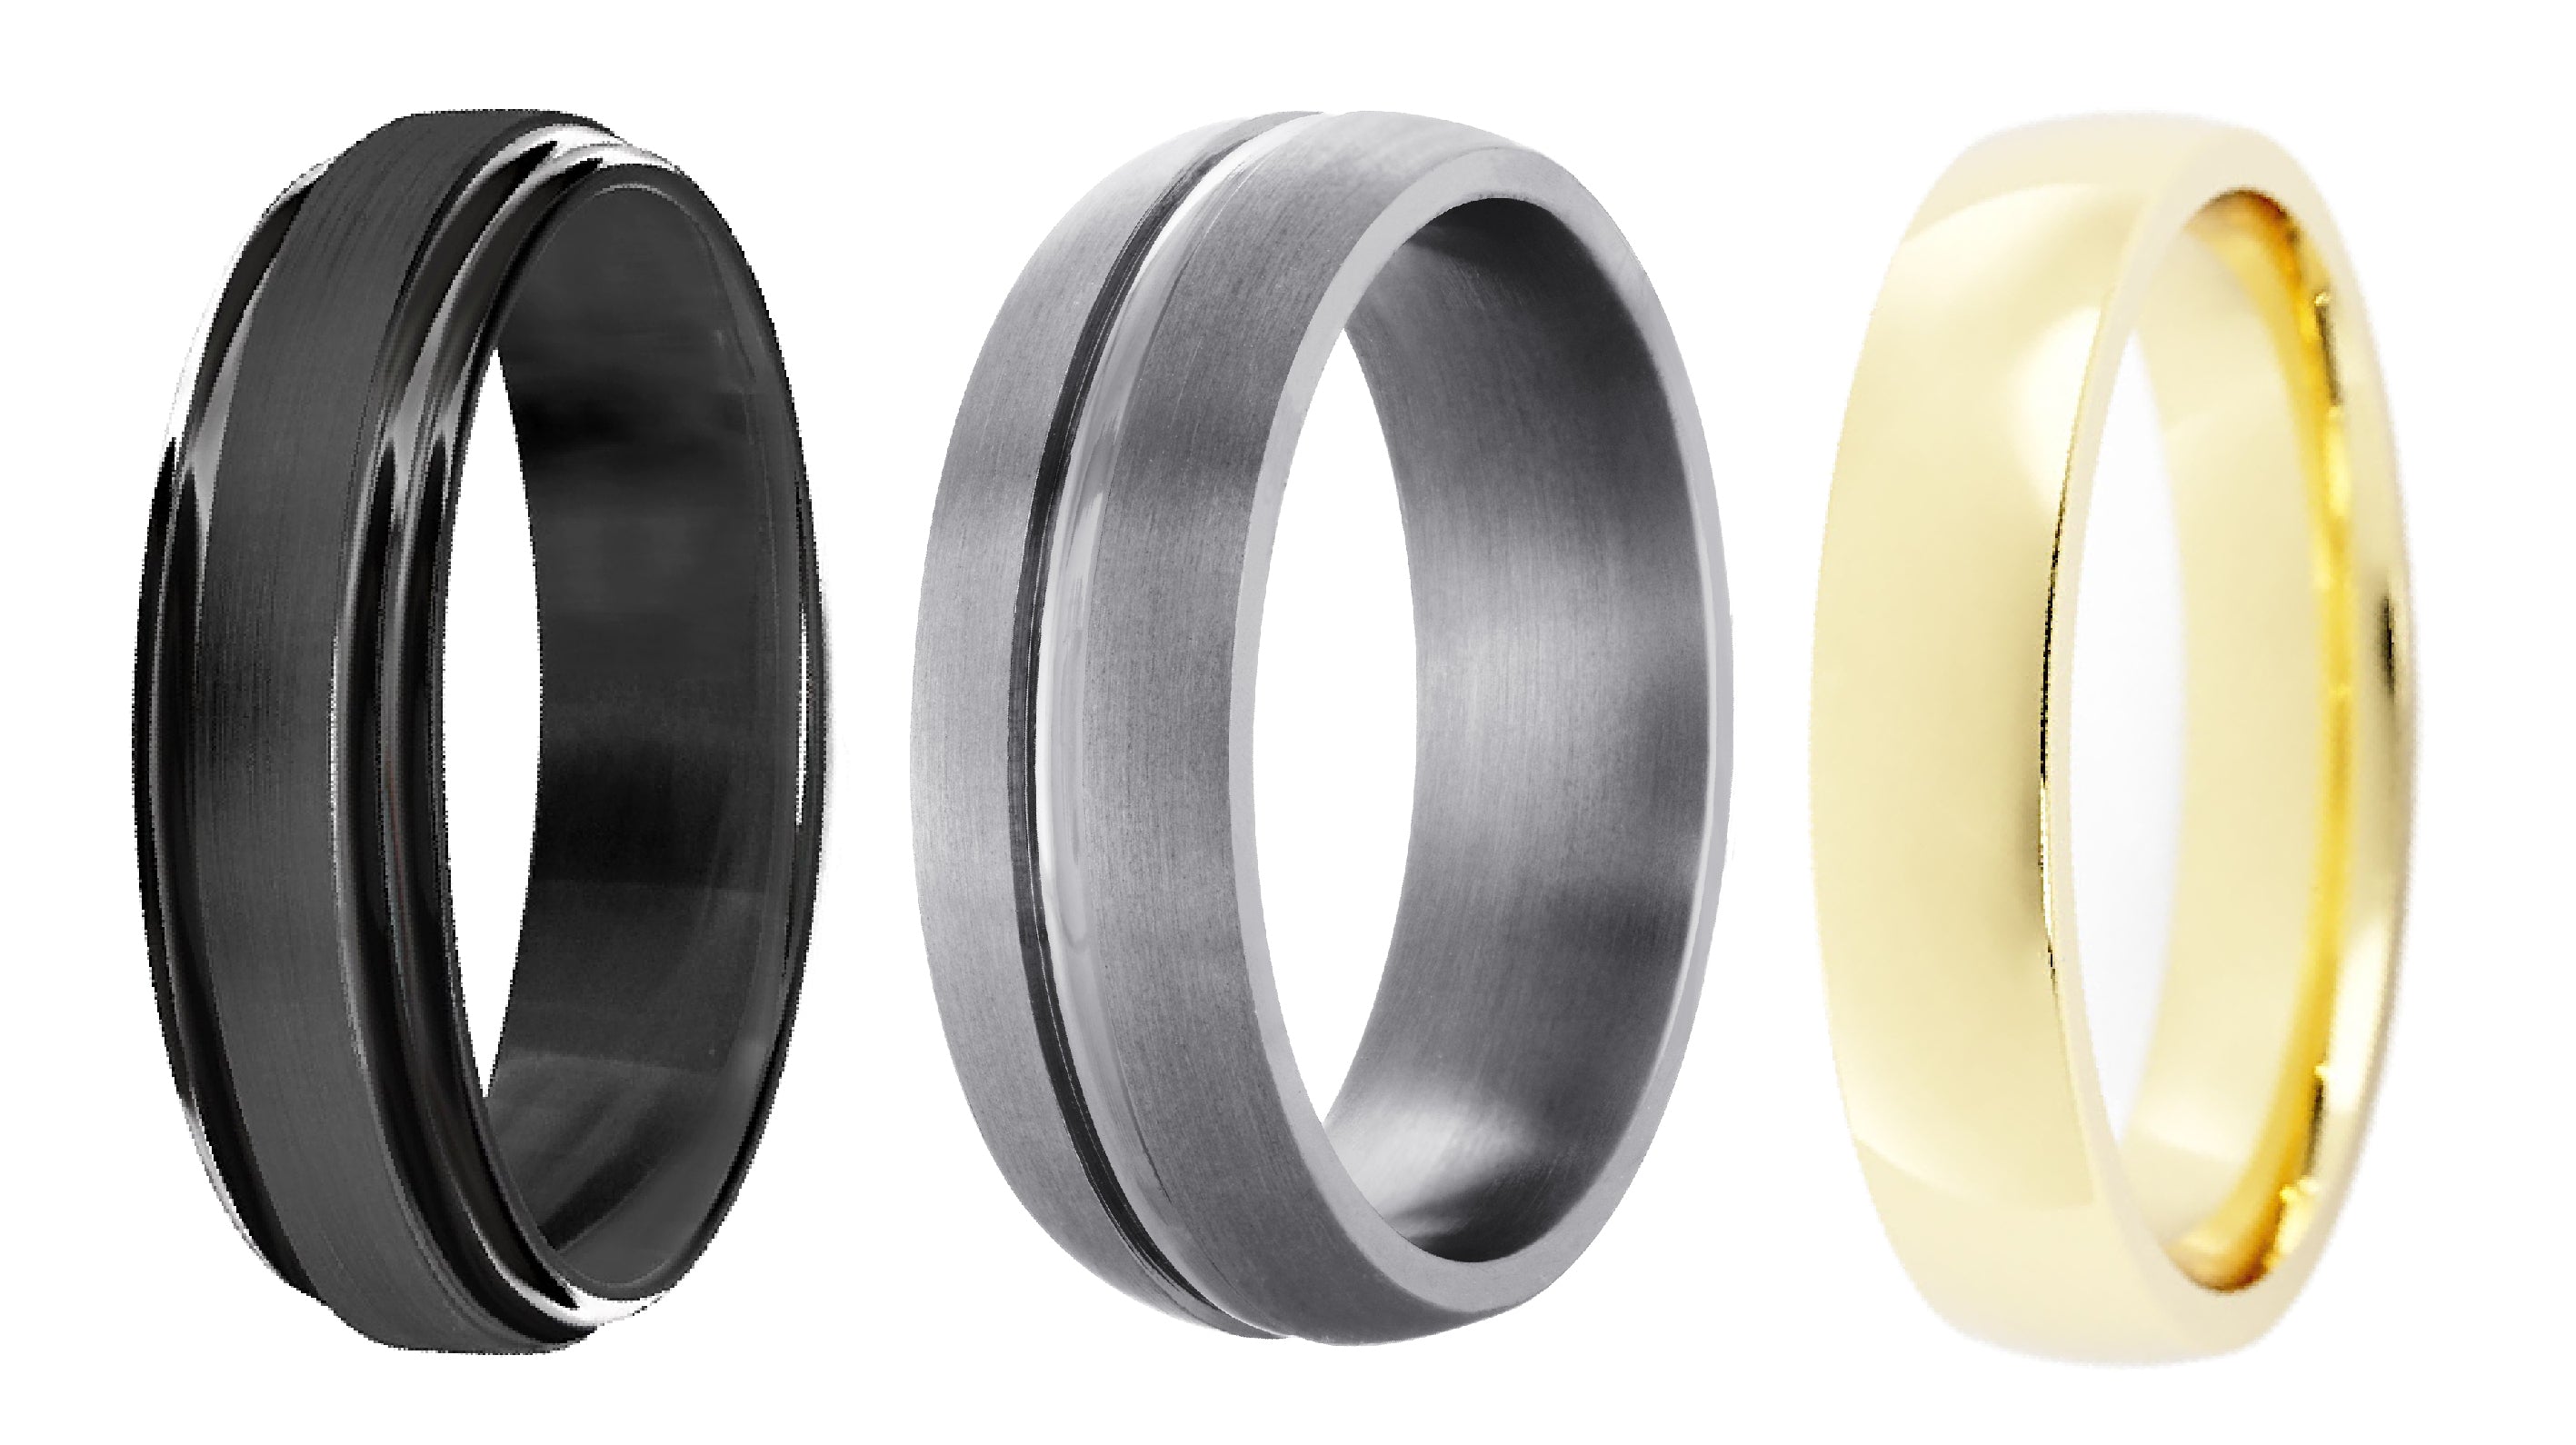 What Metal Is Best For Your Wedding Ring?